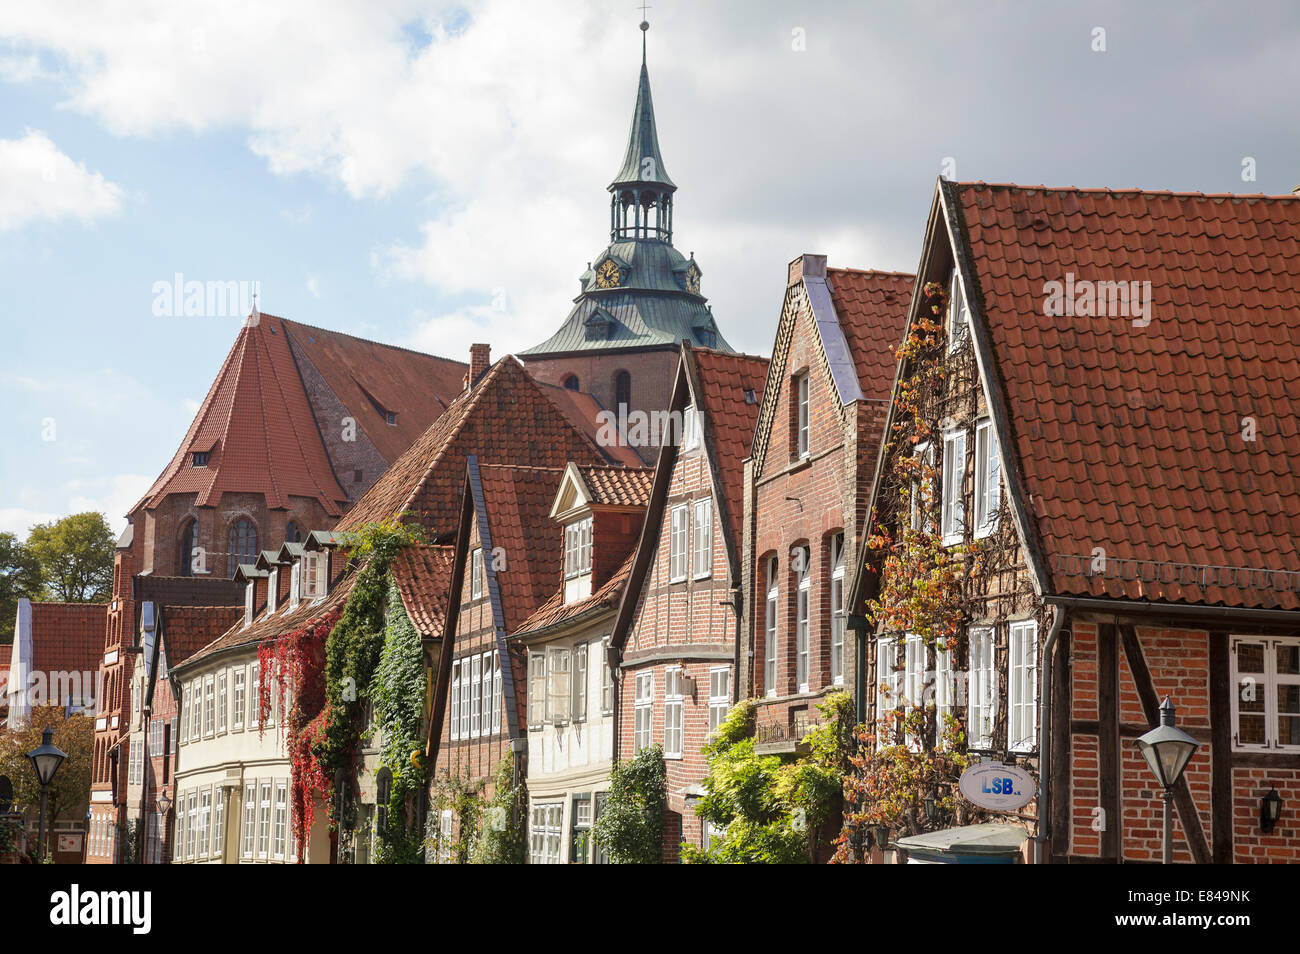 typical street in the old town, Auf dem Meer, Luneburg, Lower Saxony, Germany Stock Photo